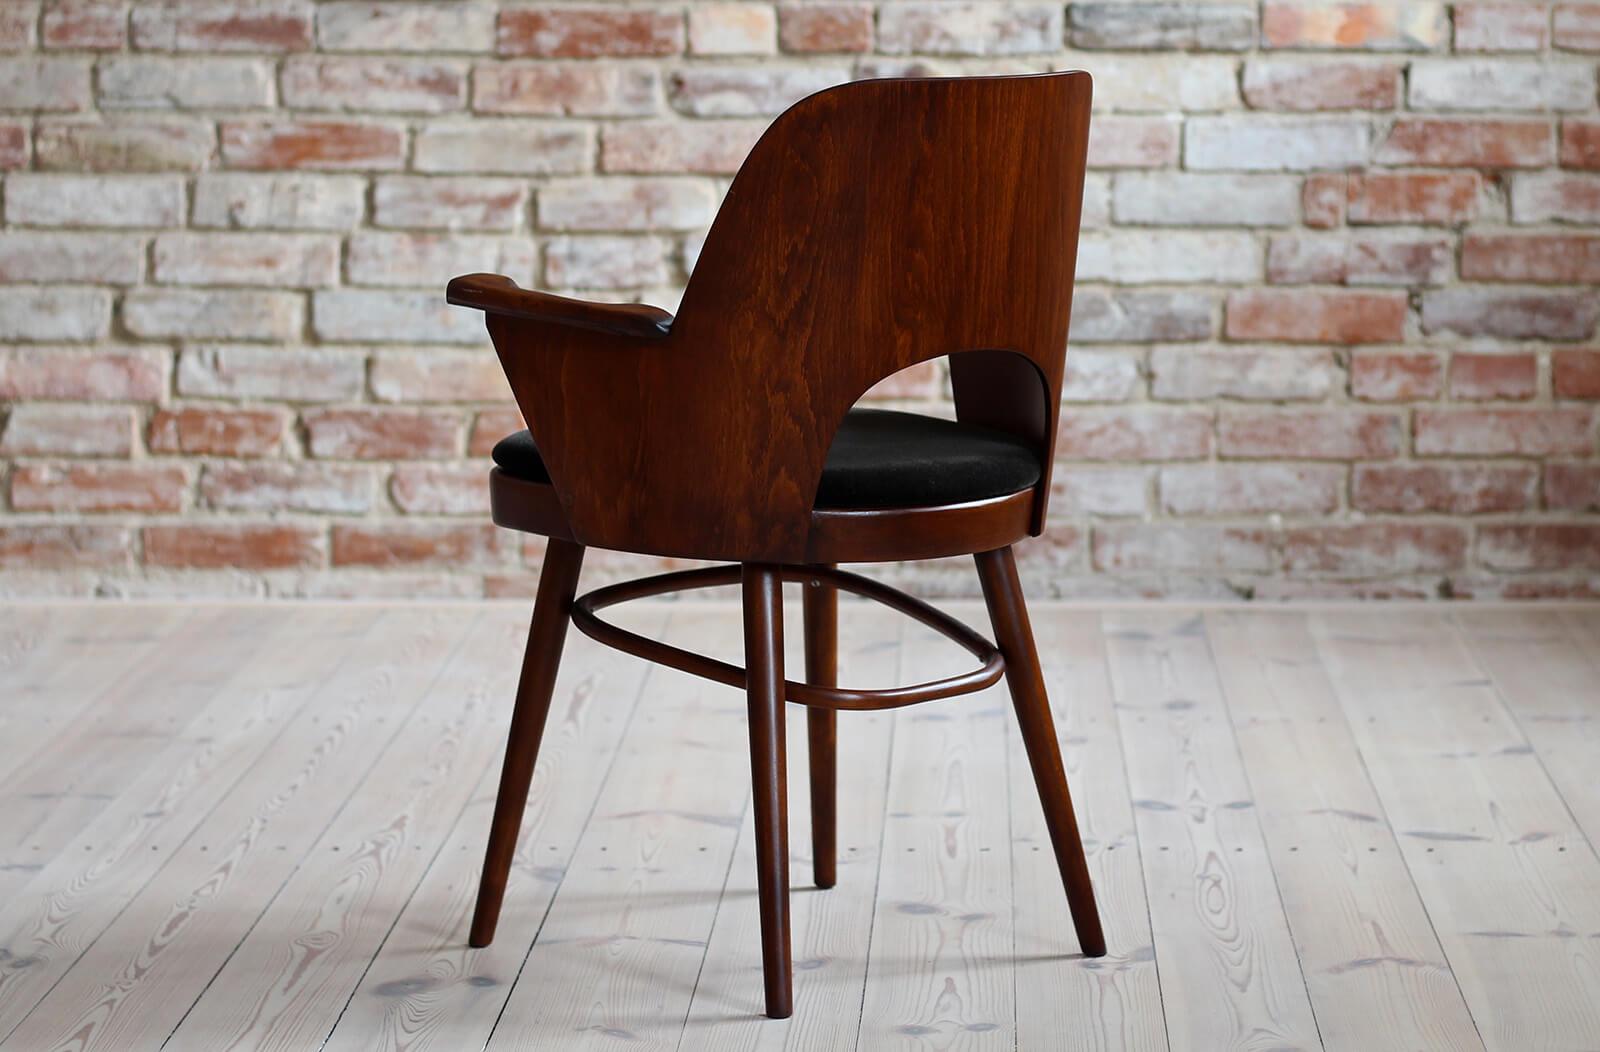 Set of 4 Midcentury Dining Chairs by L. Hofmann, Reupholstered in Kvadrat Fabric 5